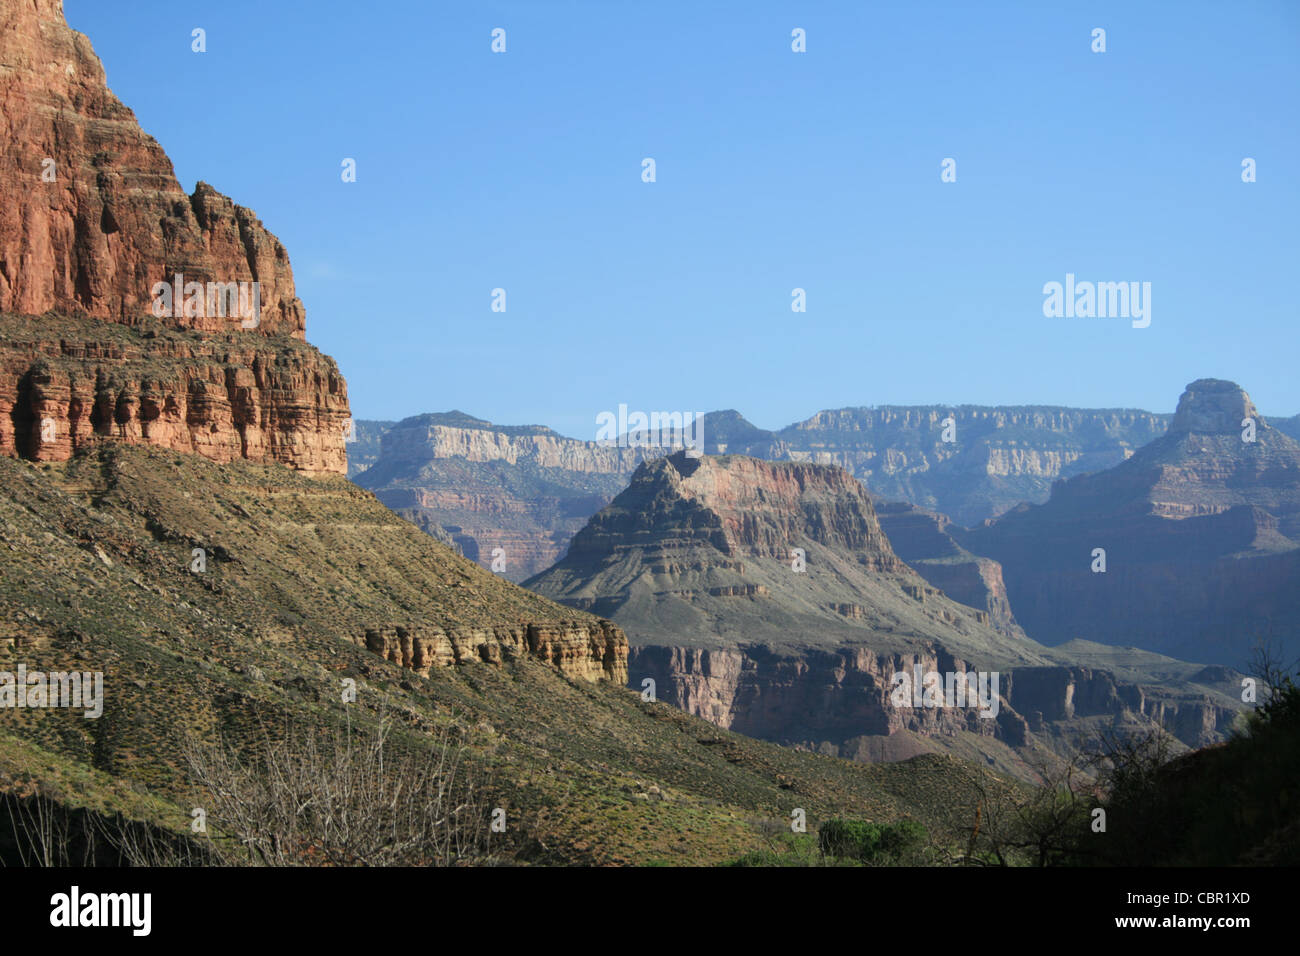 view of buttes and cliffs from the Bright Angel Trail in the Grand Canyon Stock Photo